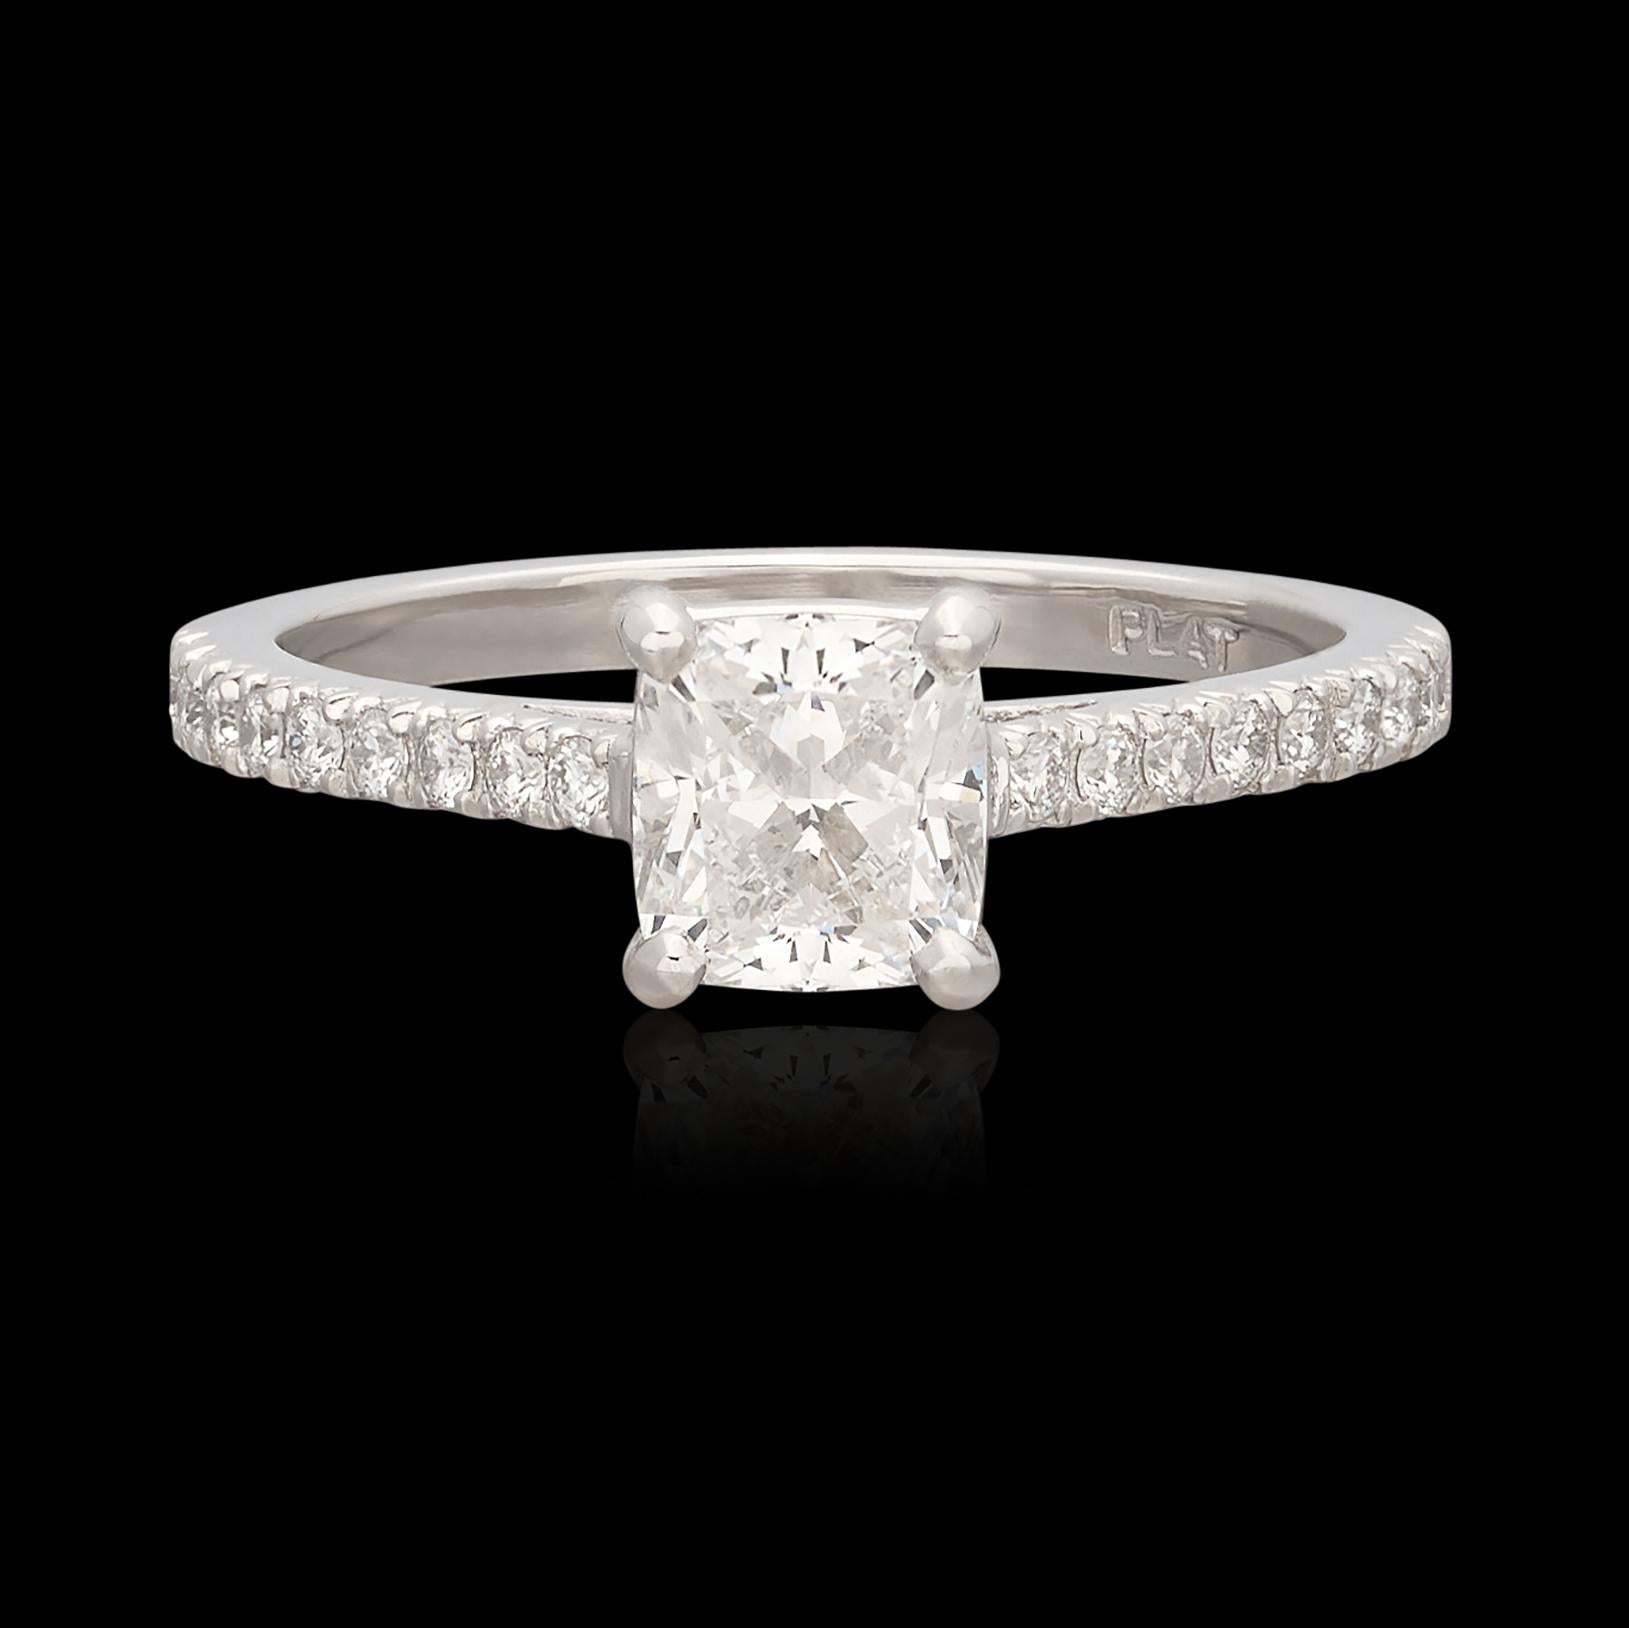 A near perfect diamond expertly set in a truly beautiful ring. This Platinum stunner features an exceptional Cushion Cut natural diamond weighing .95 ct and graded by the Gemological Institute of America as F color and VS2 clarity with Excellent cut